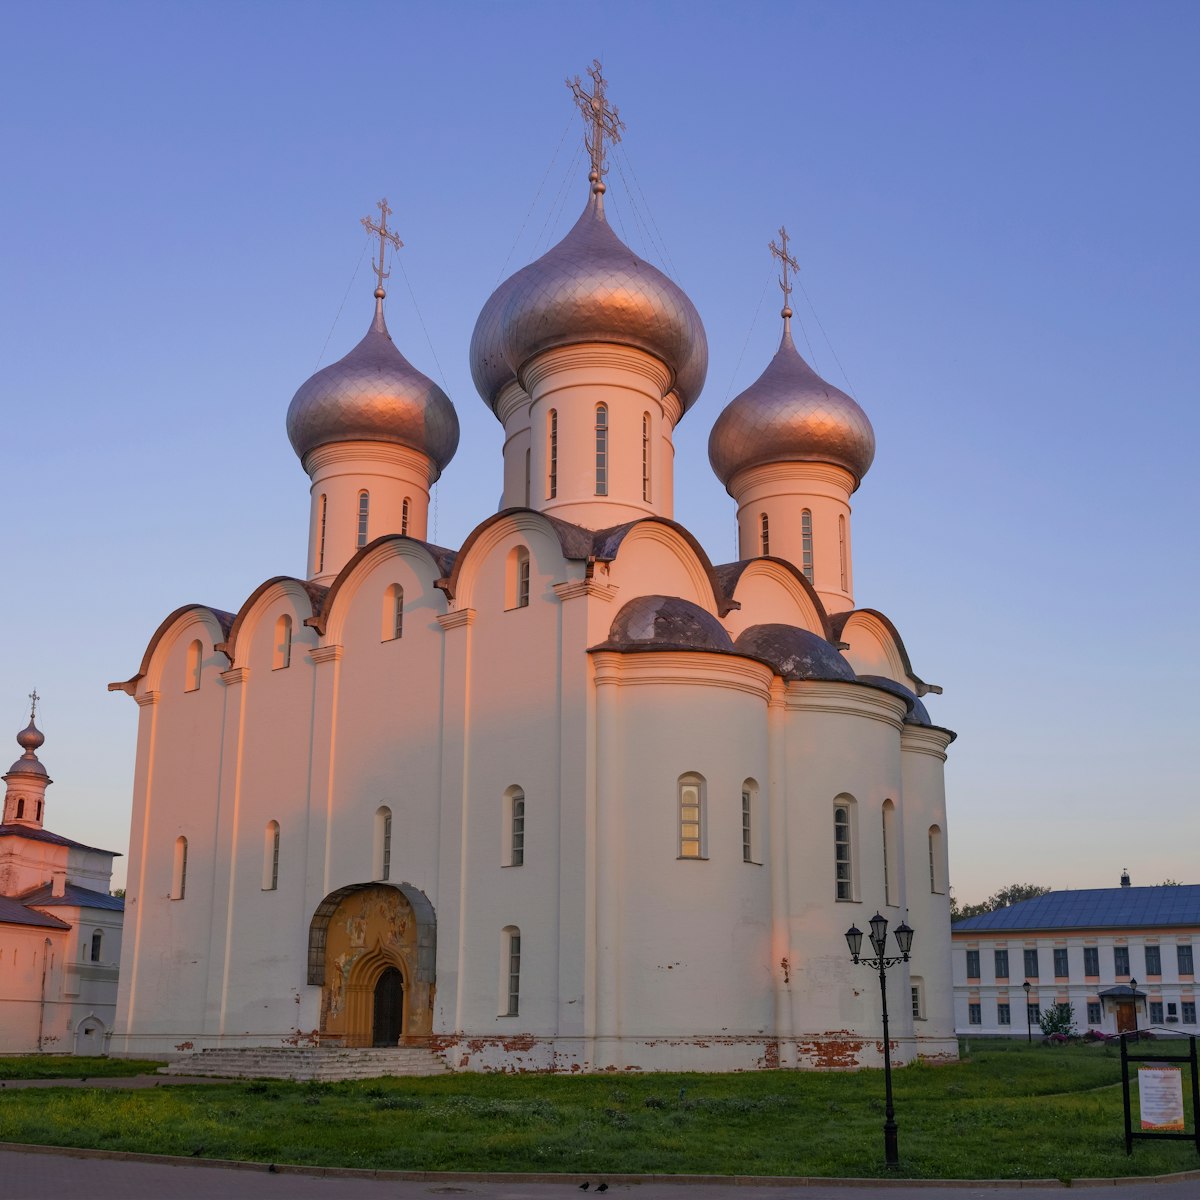 St. Sophia Cathedral on an early August morning, Vologda, Russia.